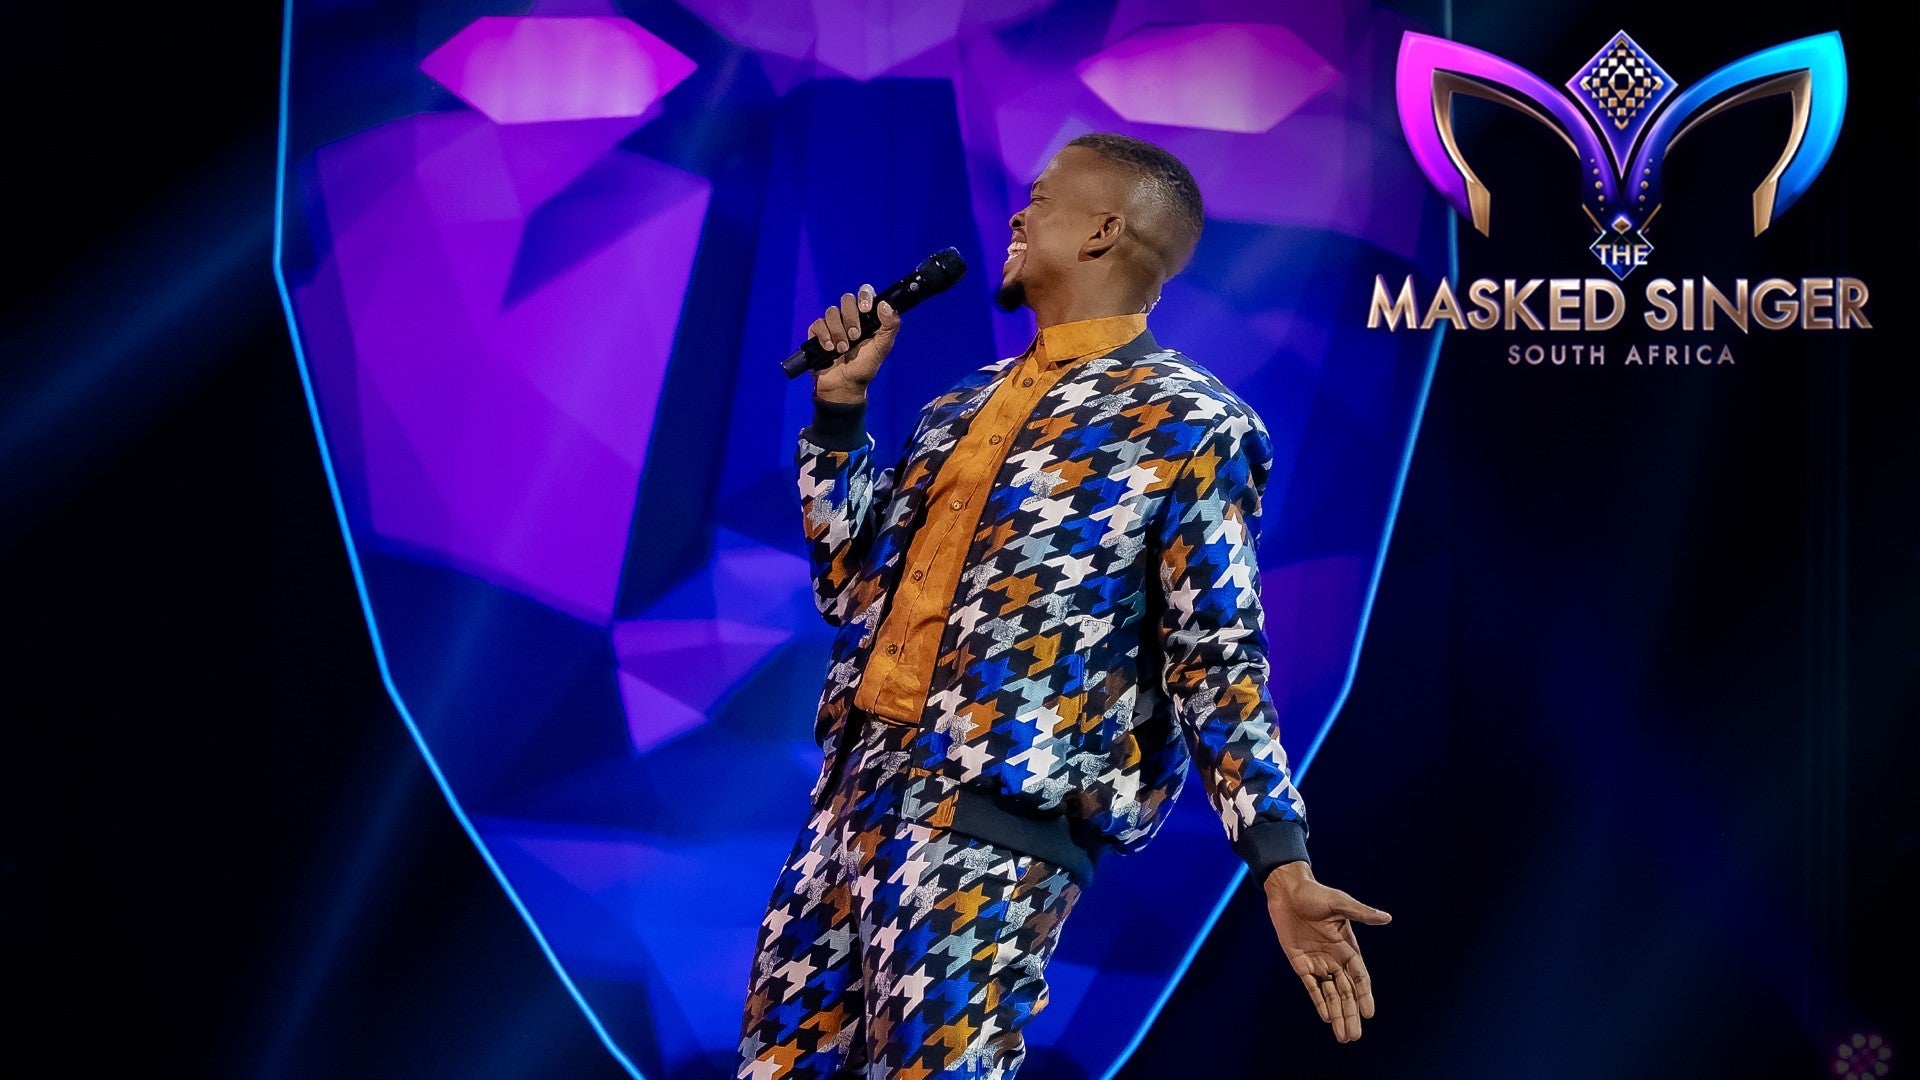 The Masked Singer South Africa